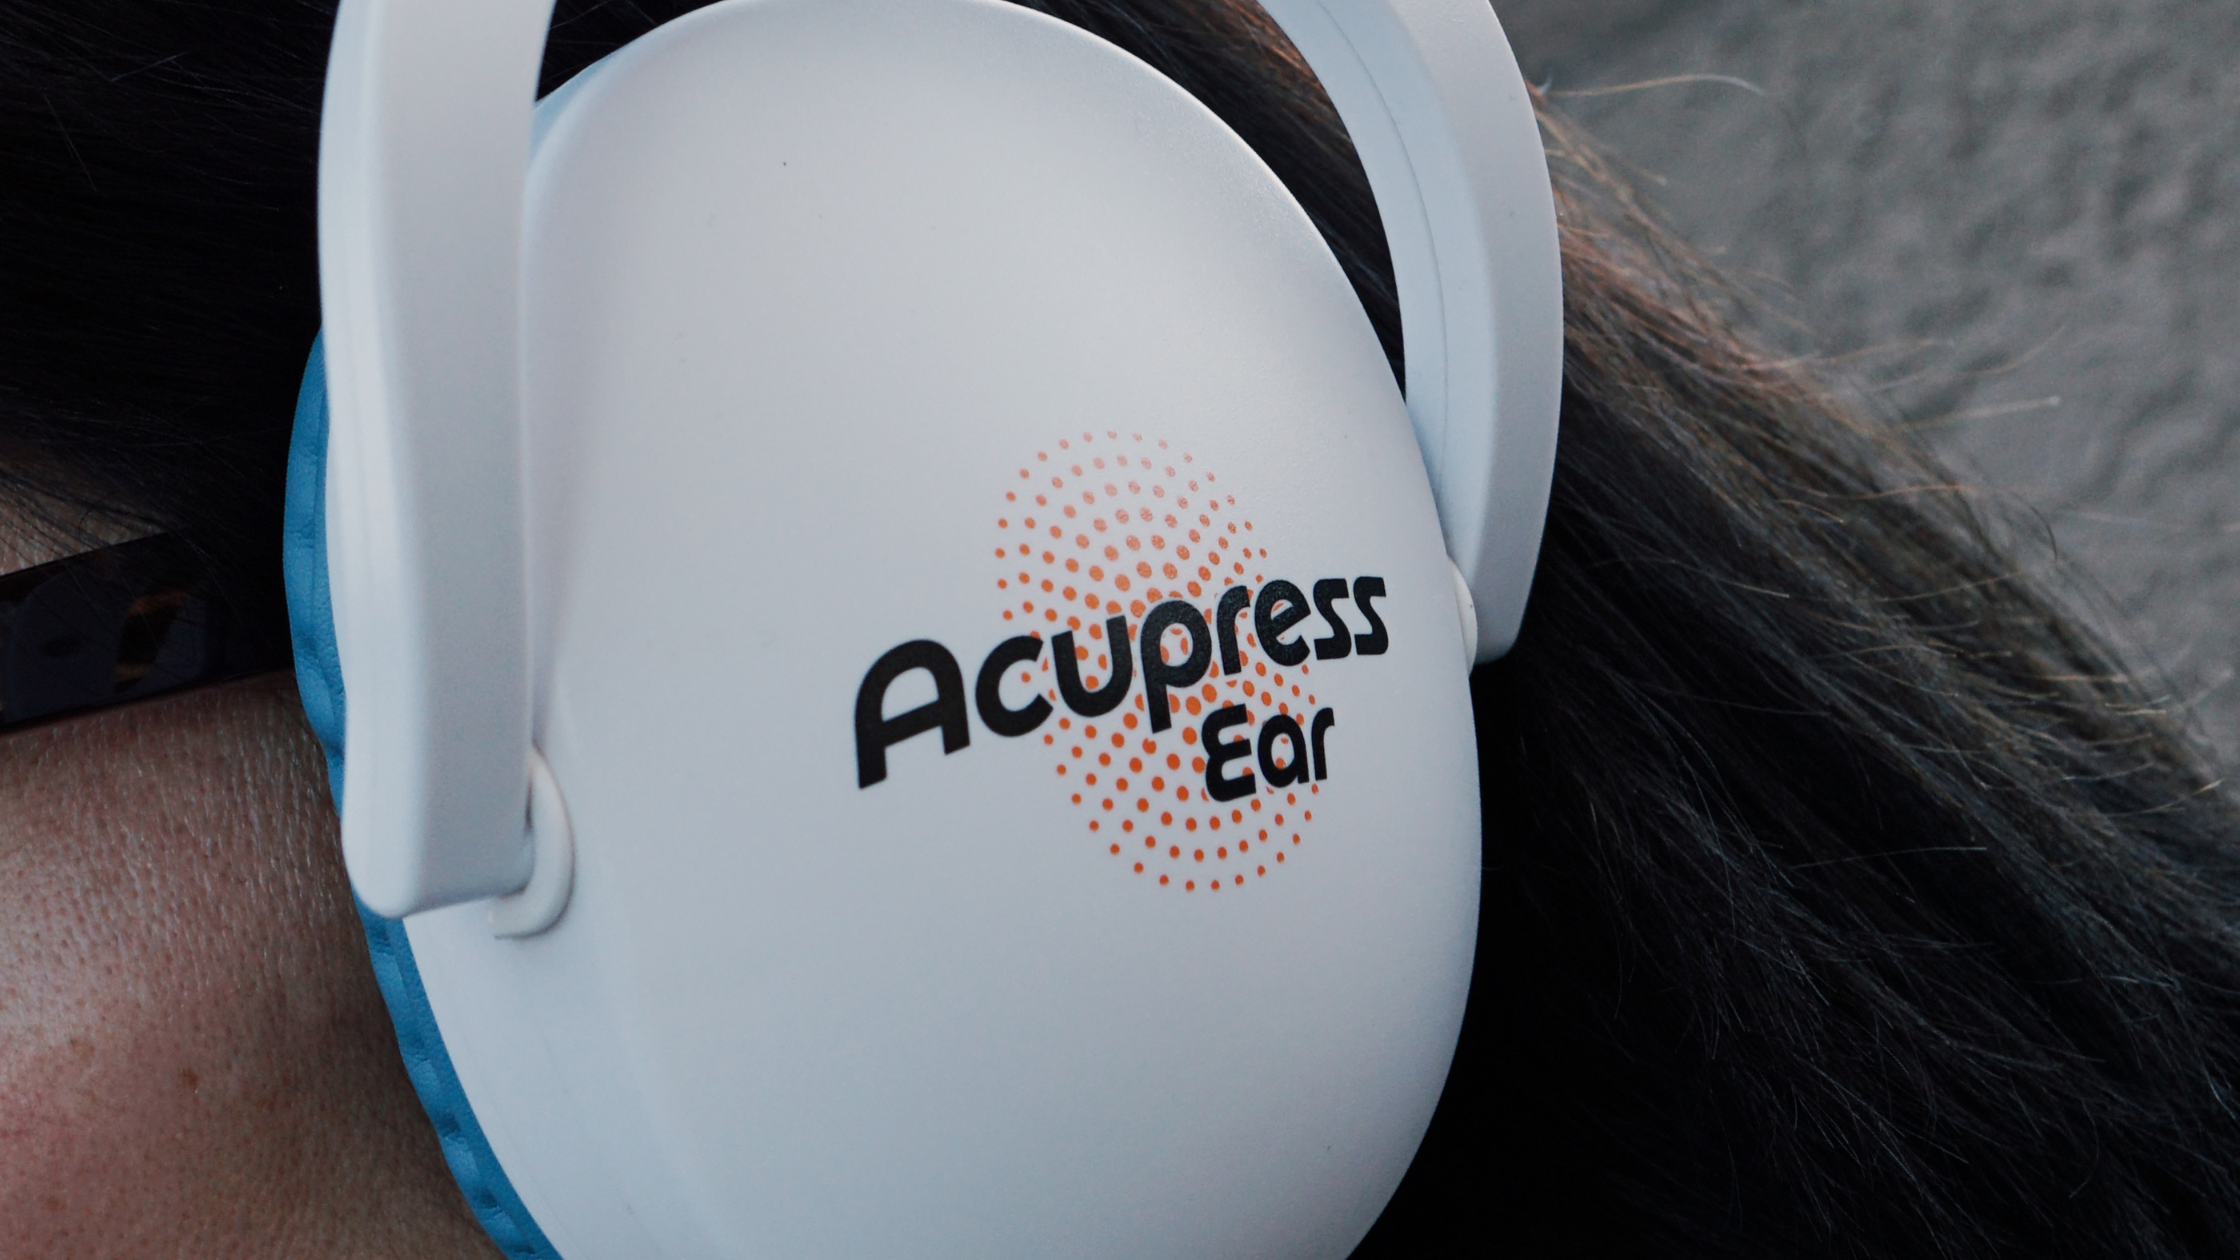 The Impact of Acupress Ear on Future Healing Technology